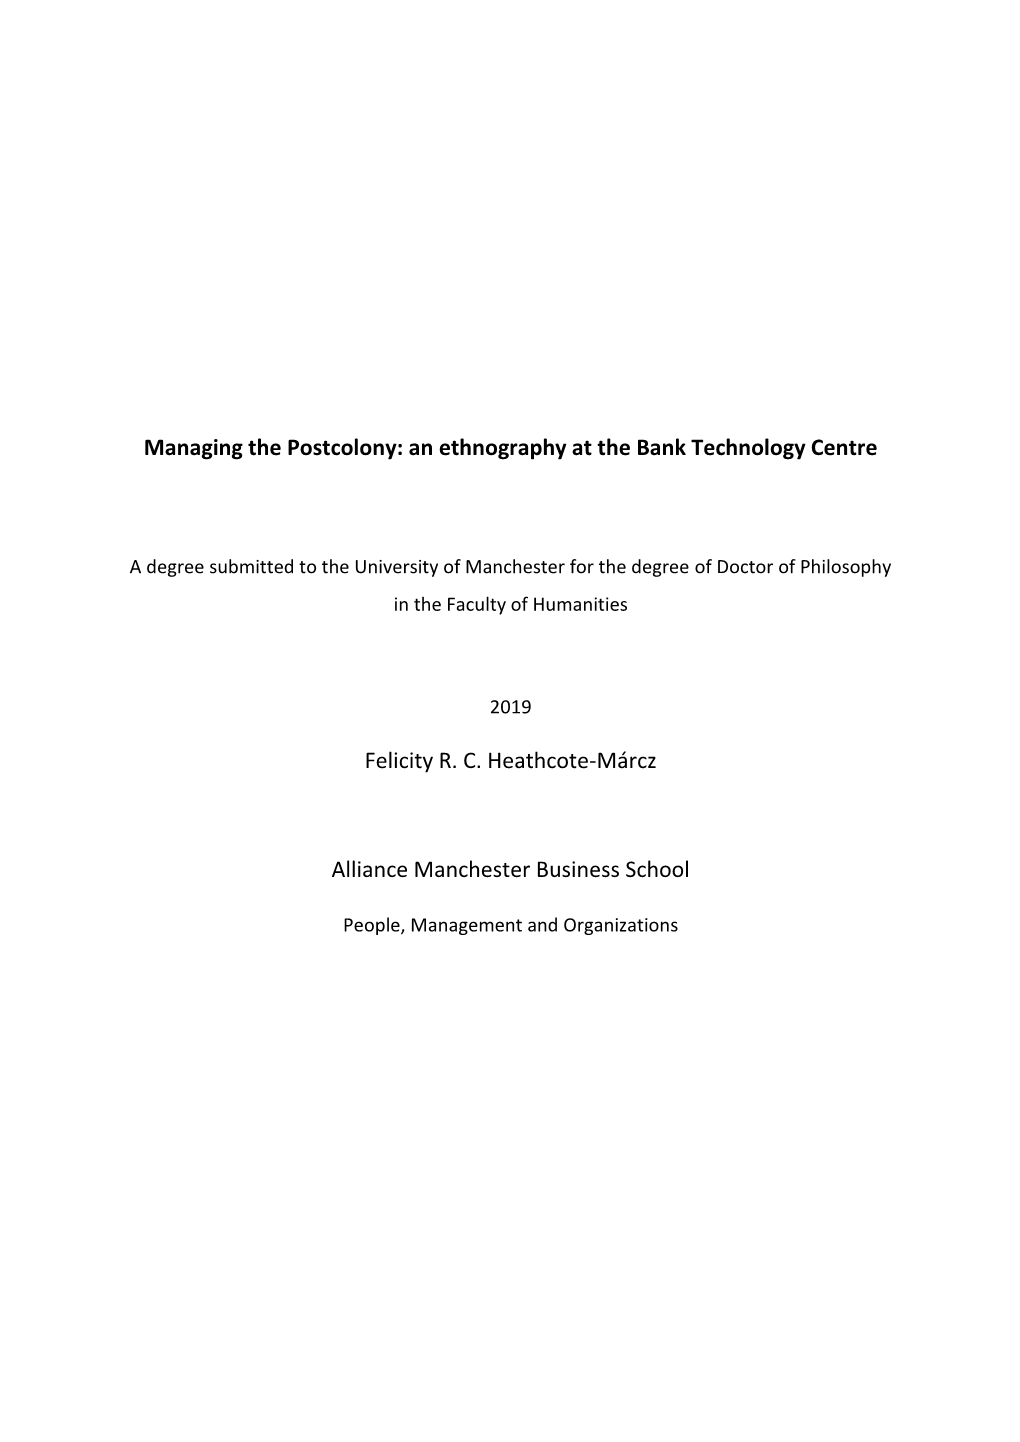 Managing the Postcolony: an Ethnography at the Bank Technology Centre